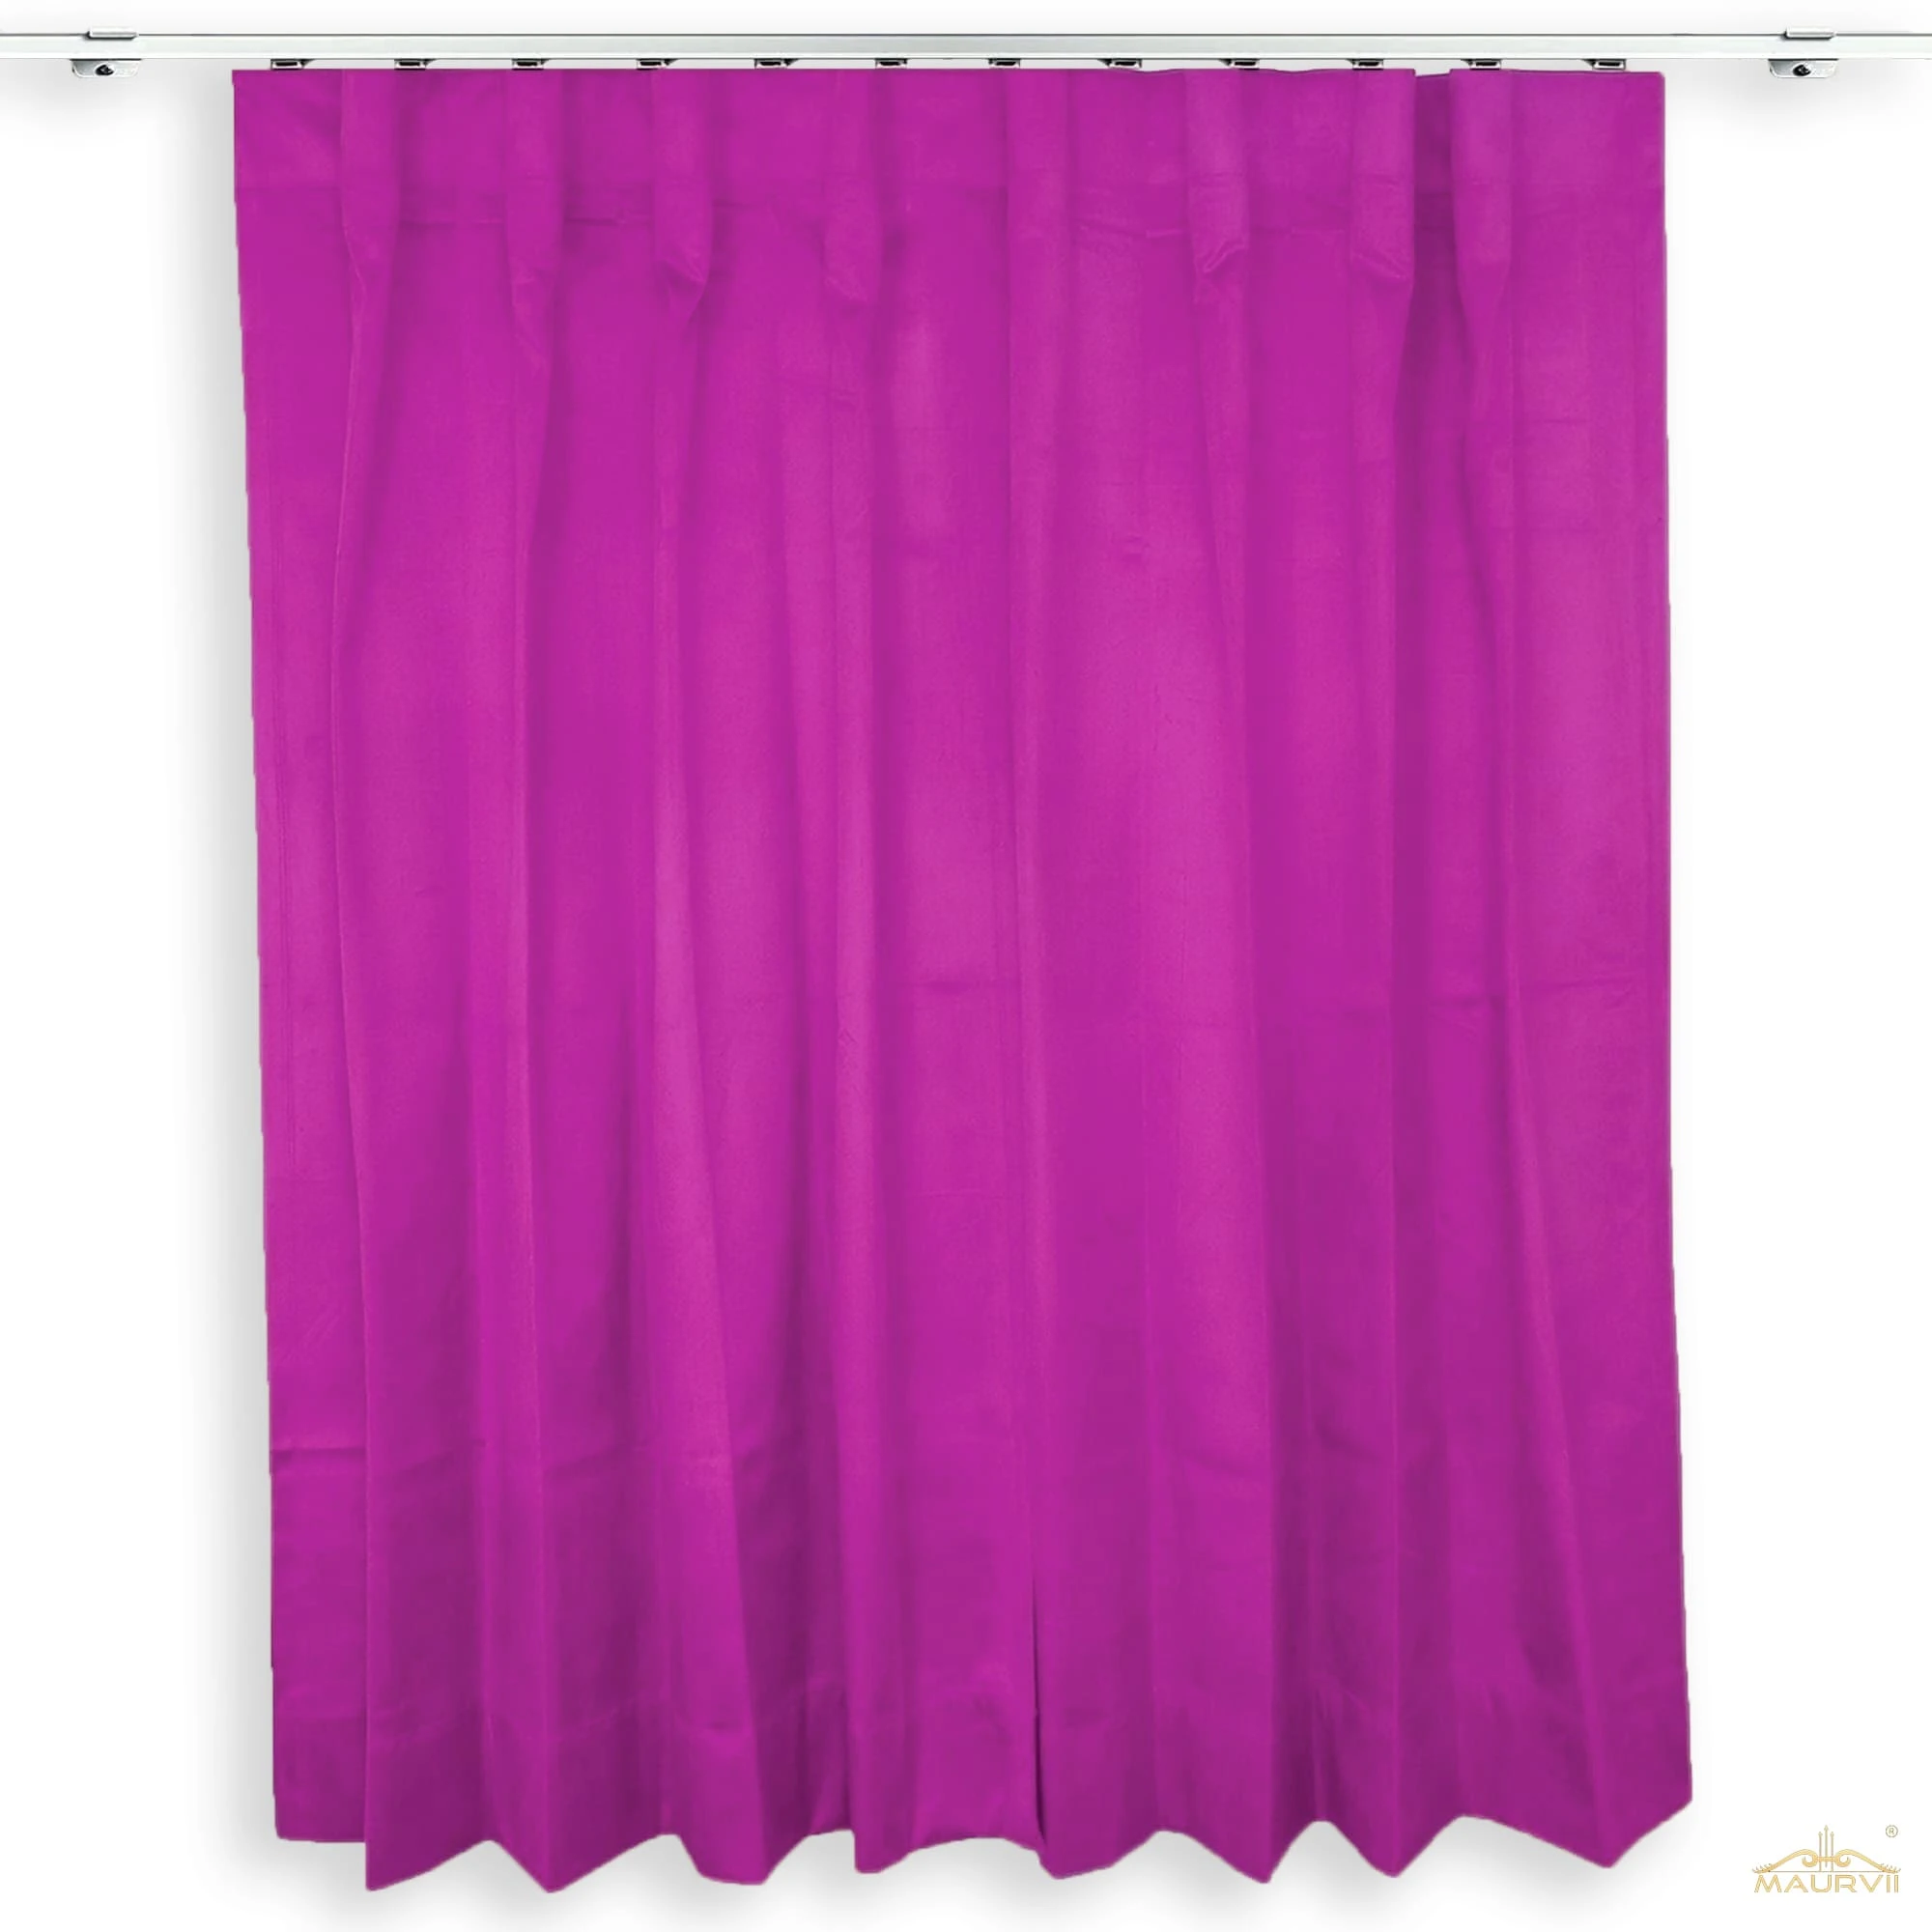 Triple pleated velvet curtains in pink color